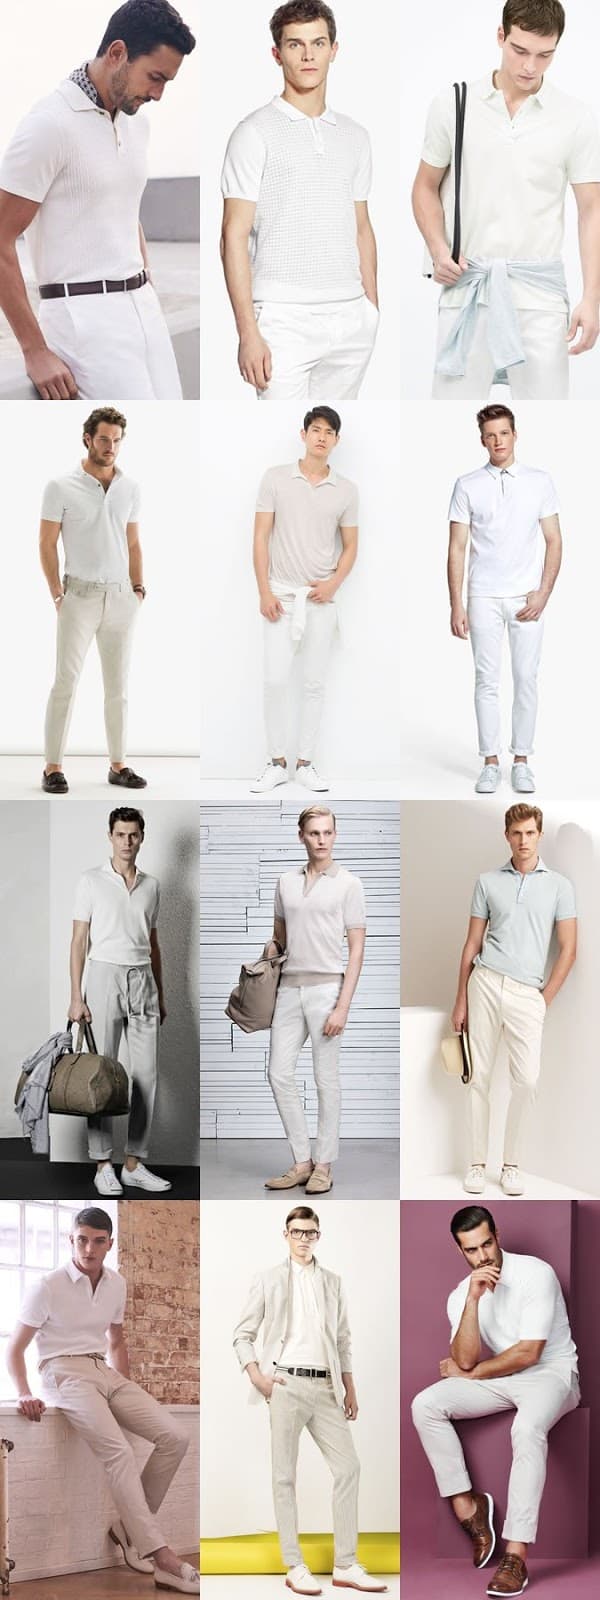 how to wear polo shirt on all whites